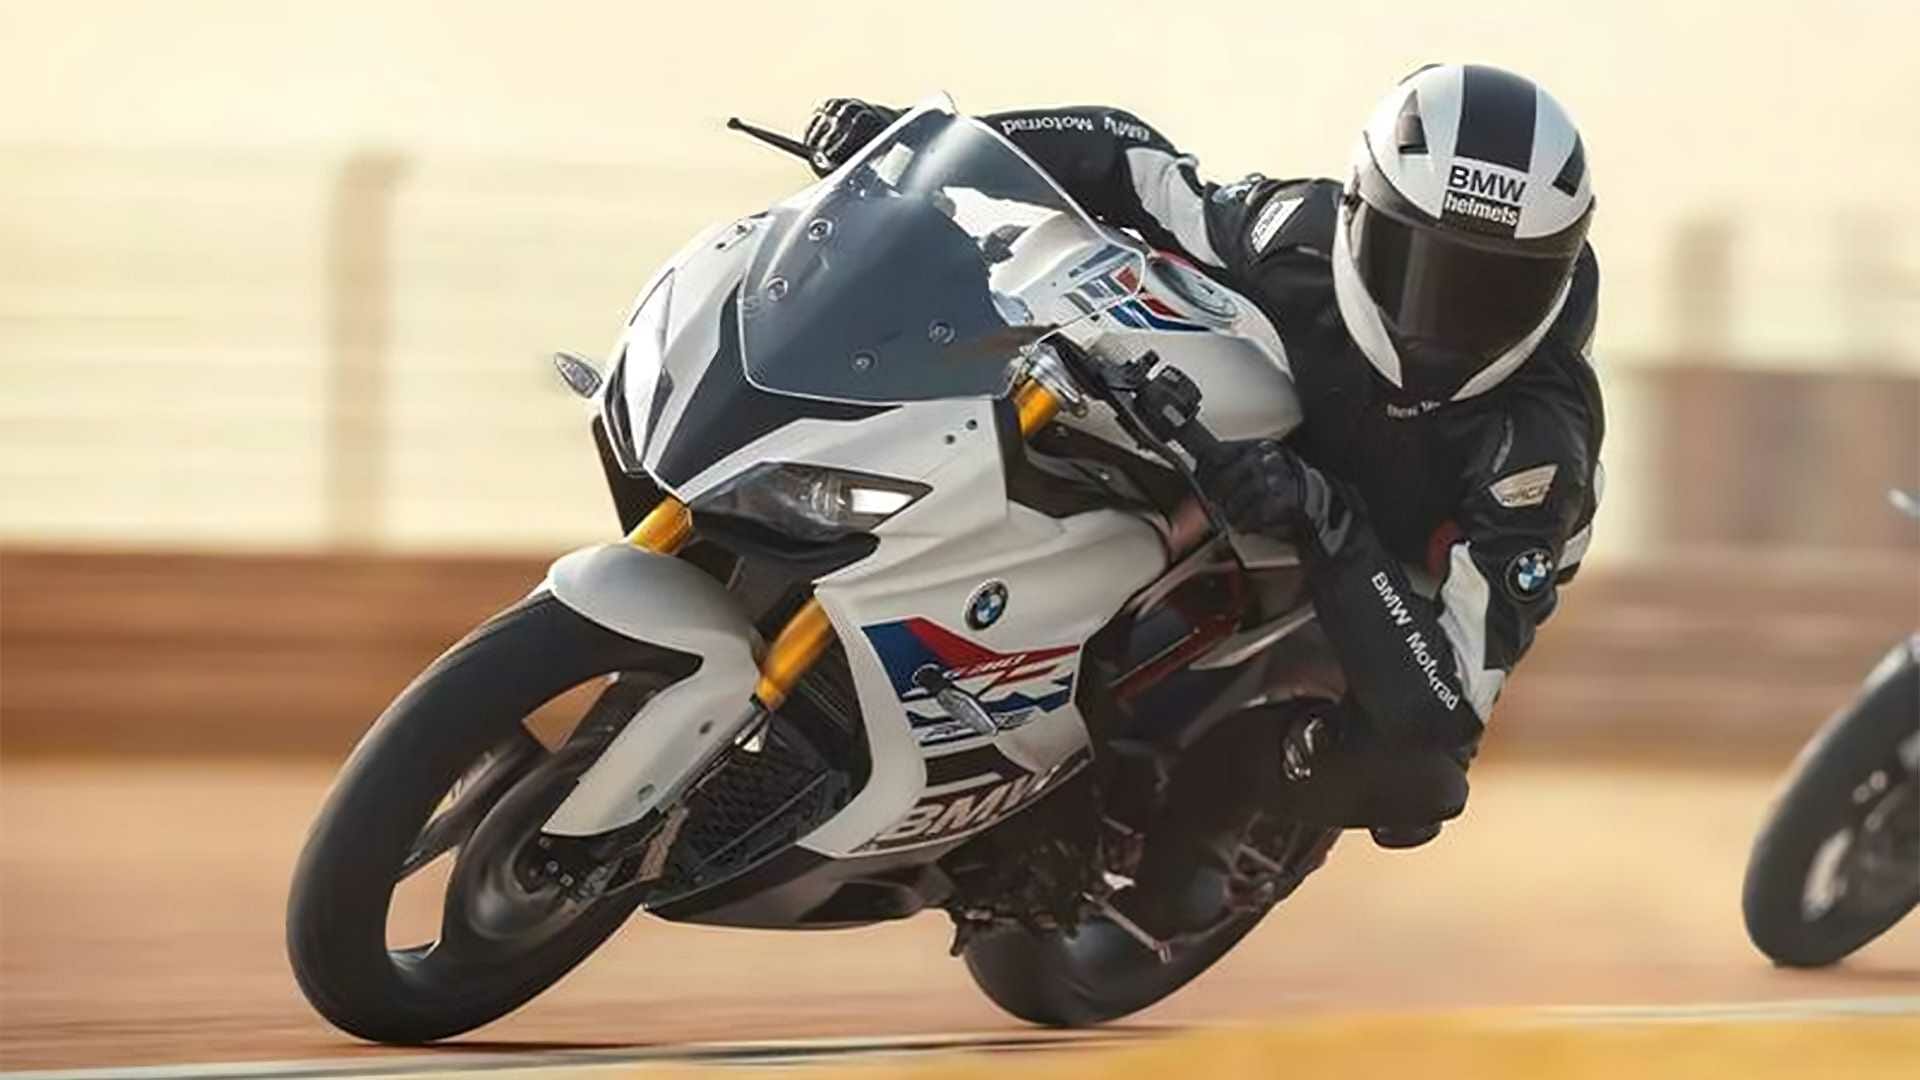 BMW G 310 RR presented - MOTORCYCLES.NEWS